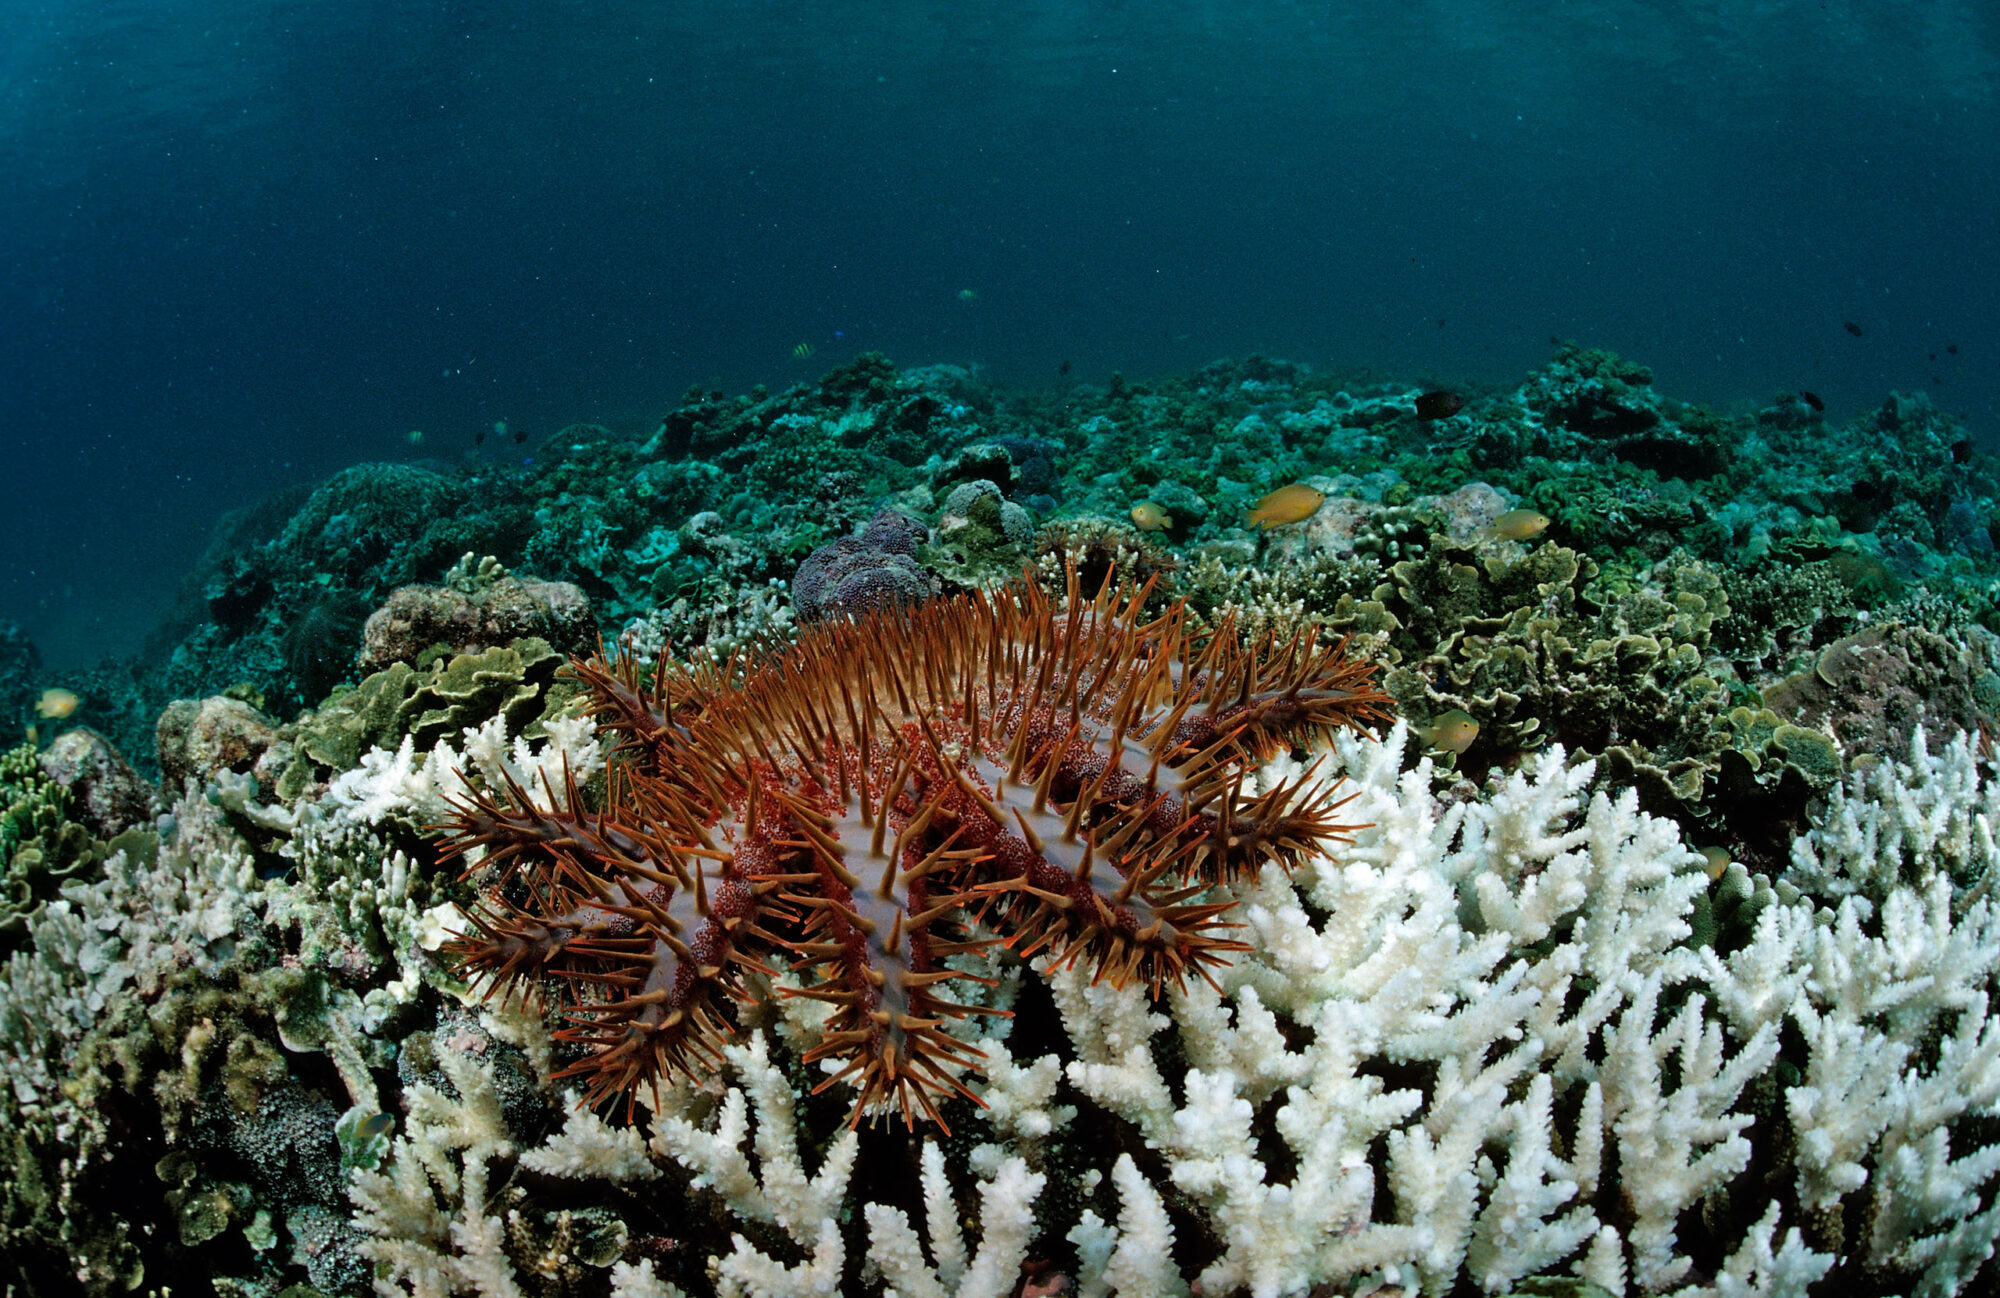 crown-of-thorns starfish have severely damaged coral in the Great Barrier Reef